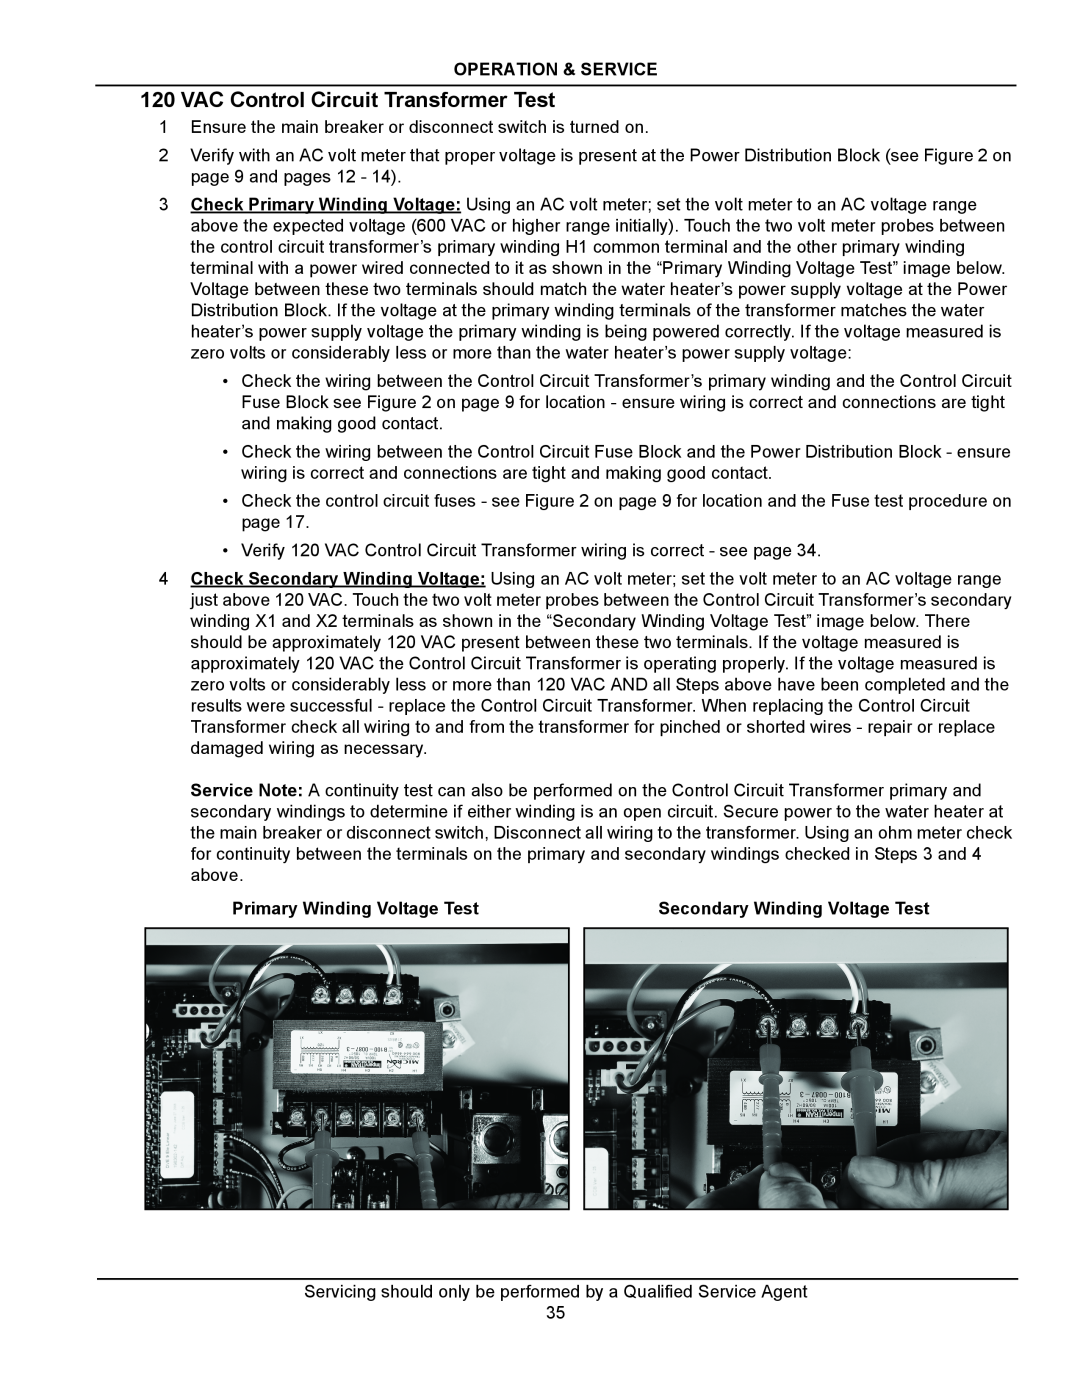 American Water Heater ITCE3-52/80/119, STCE3-52/80/119 manual VAC Control Circuit Transformer Test, Operation & Service 